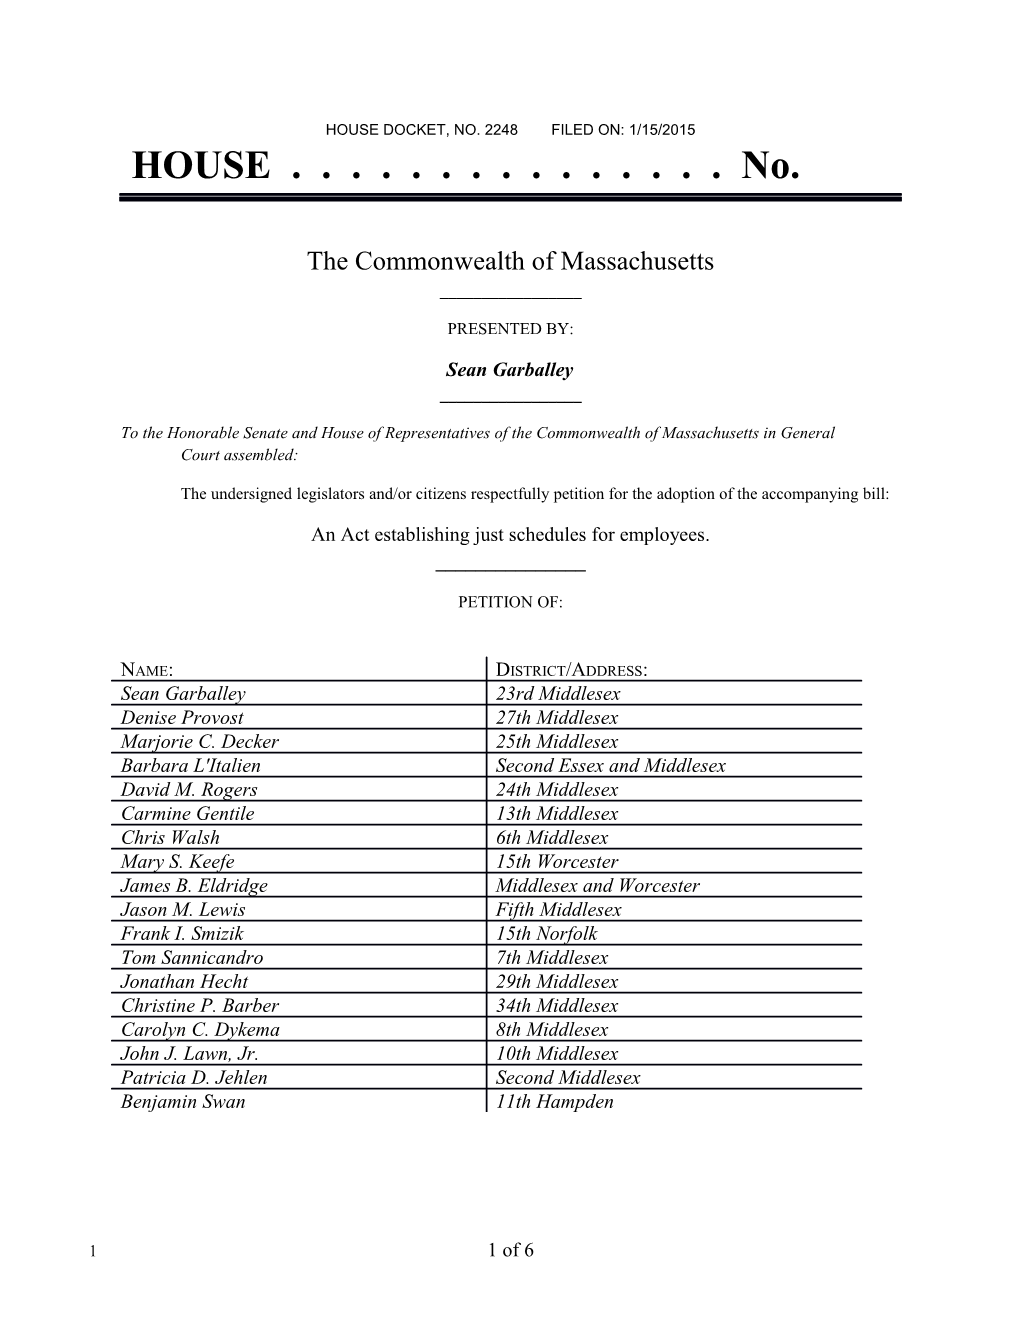 House Docket, No. 2248 Filed On: 1/15/2015